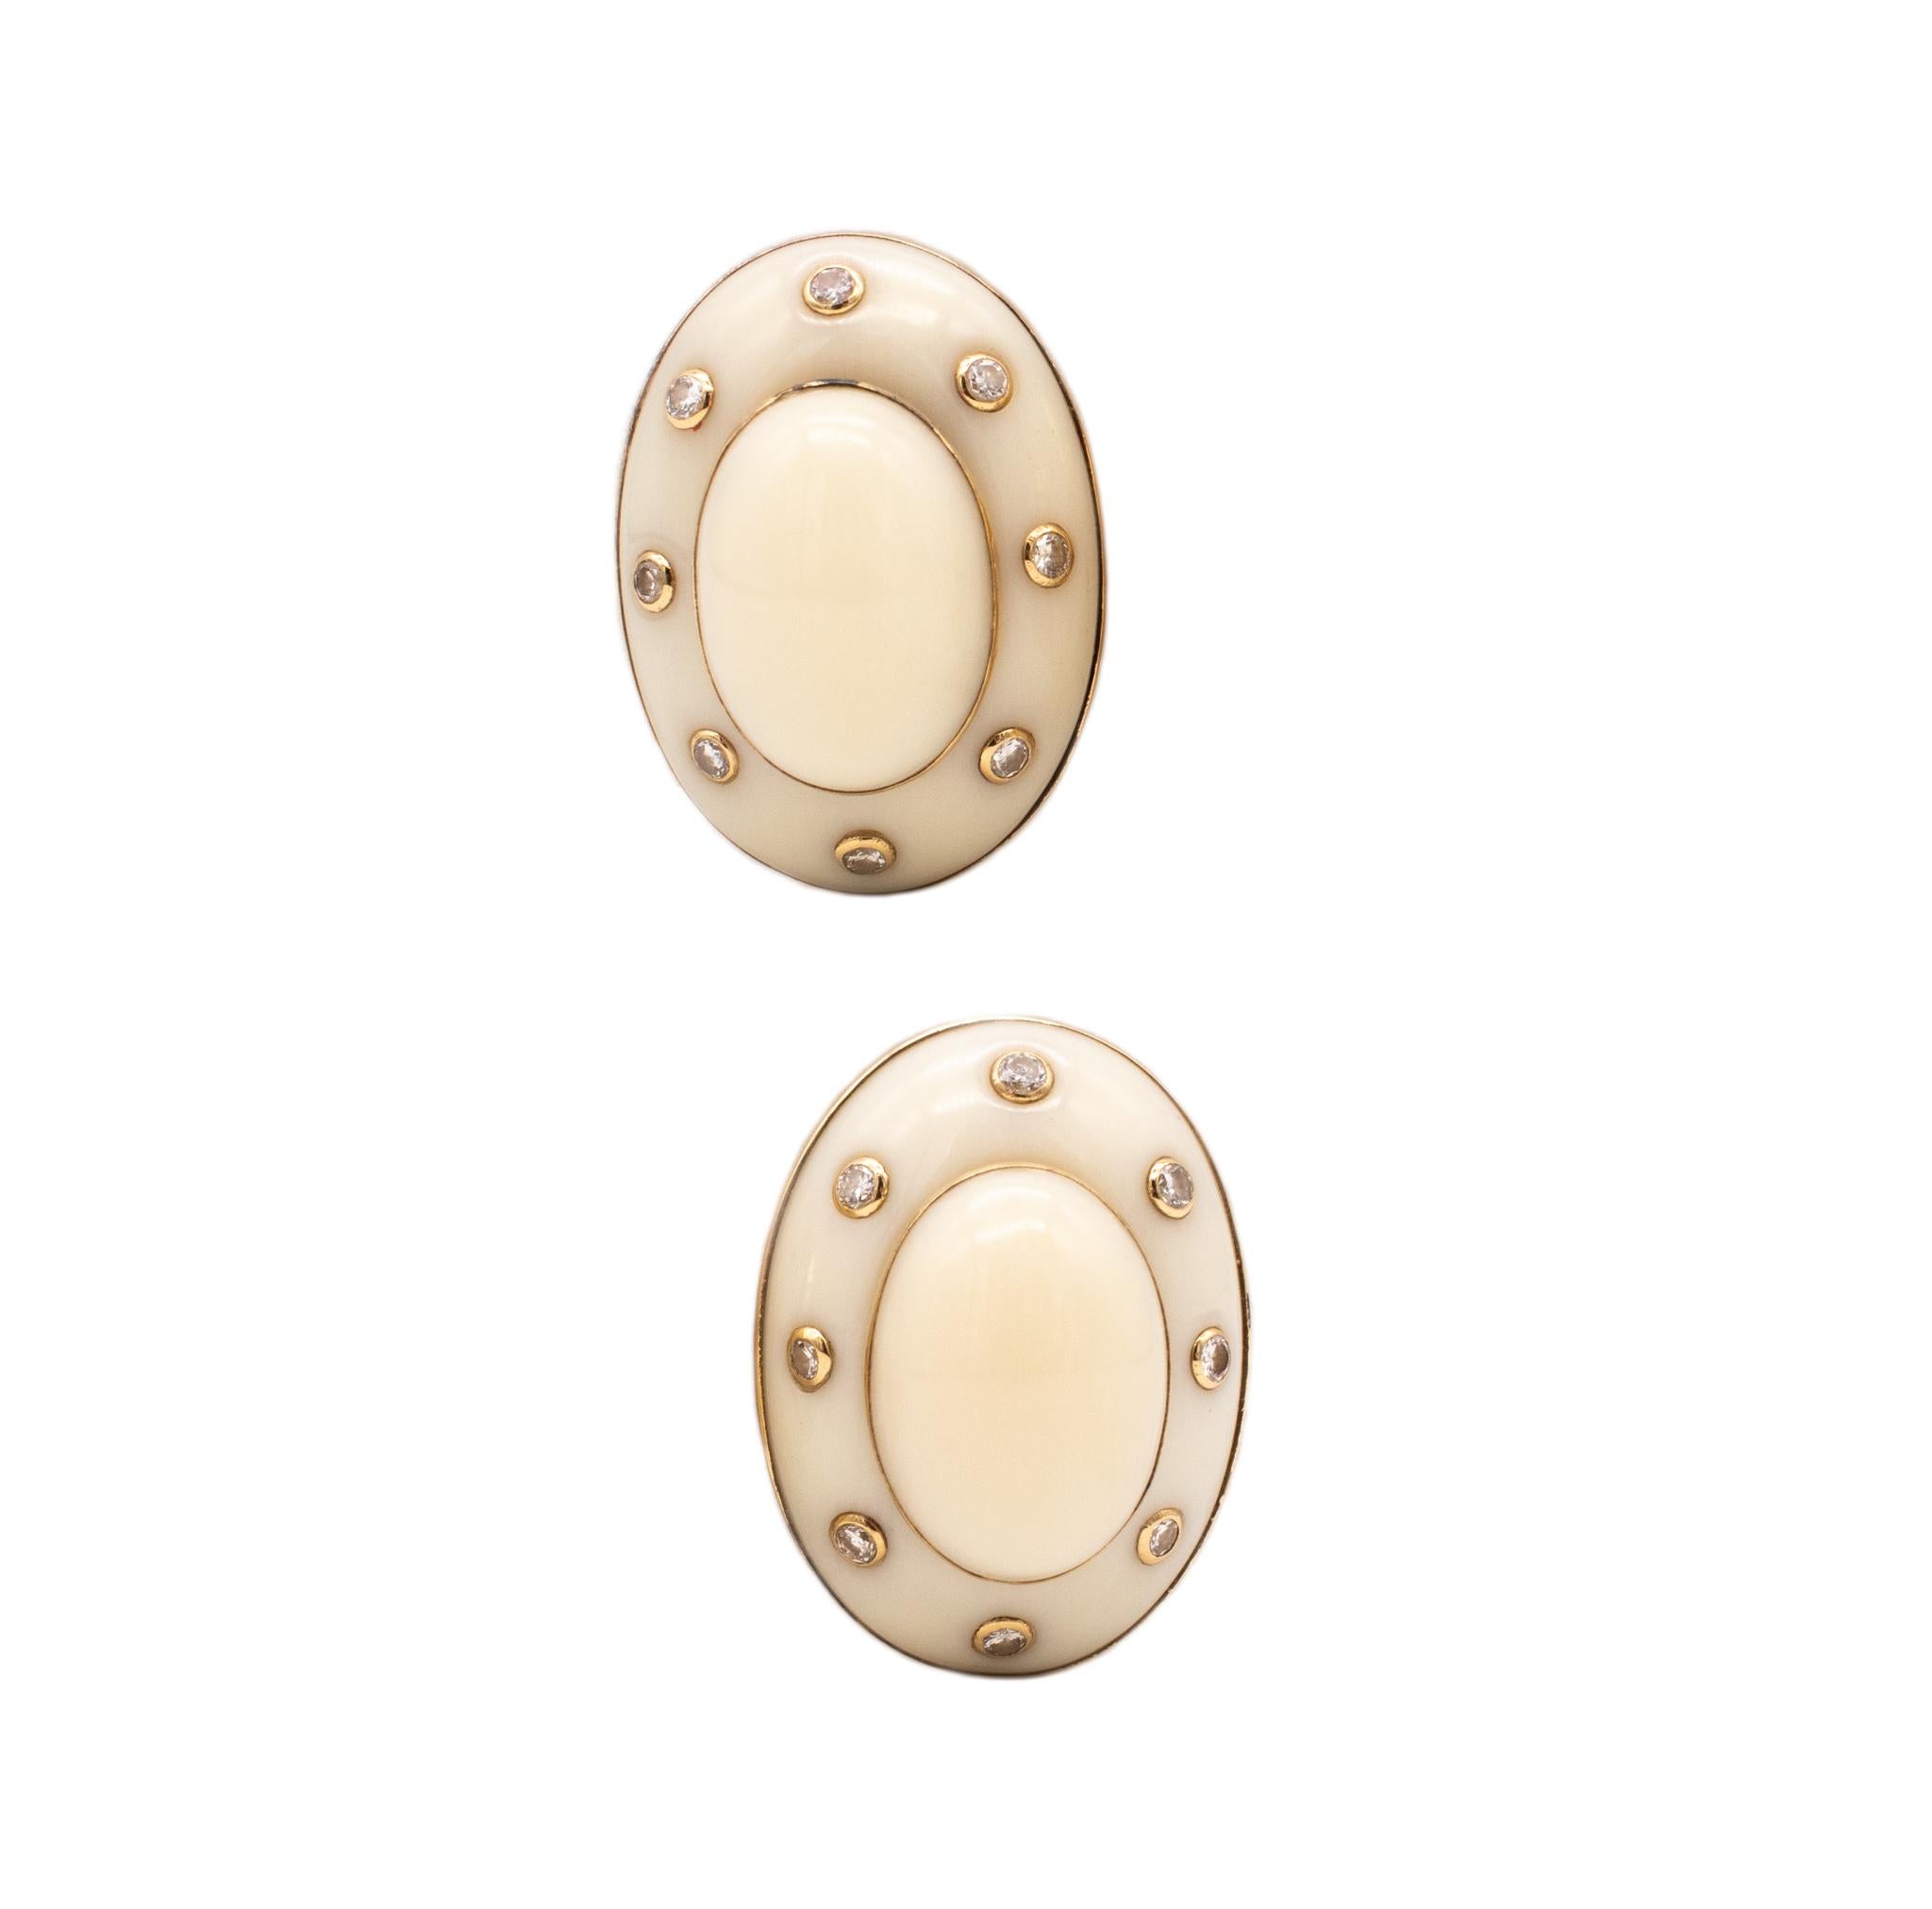 Women's Seaman Schepps 1970 Trianon 18Kt Yellow Gold Ear Clips with Diamonds and Coral